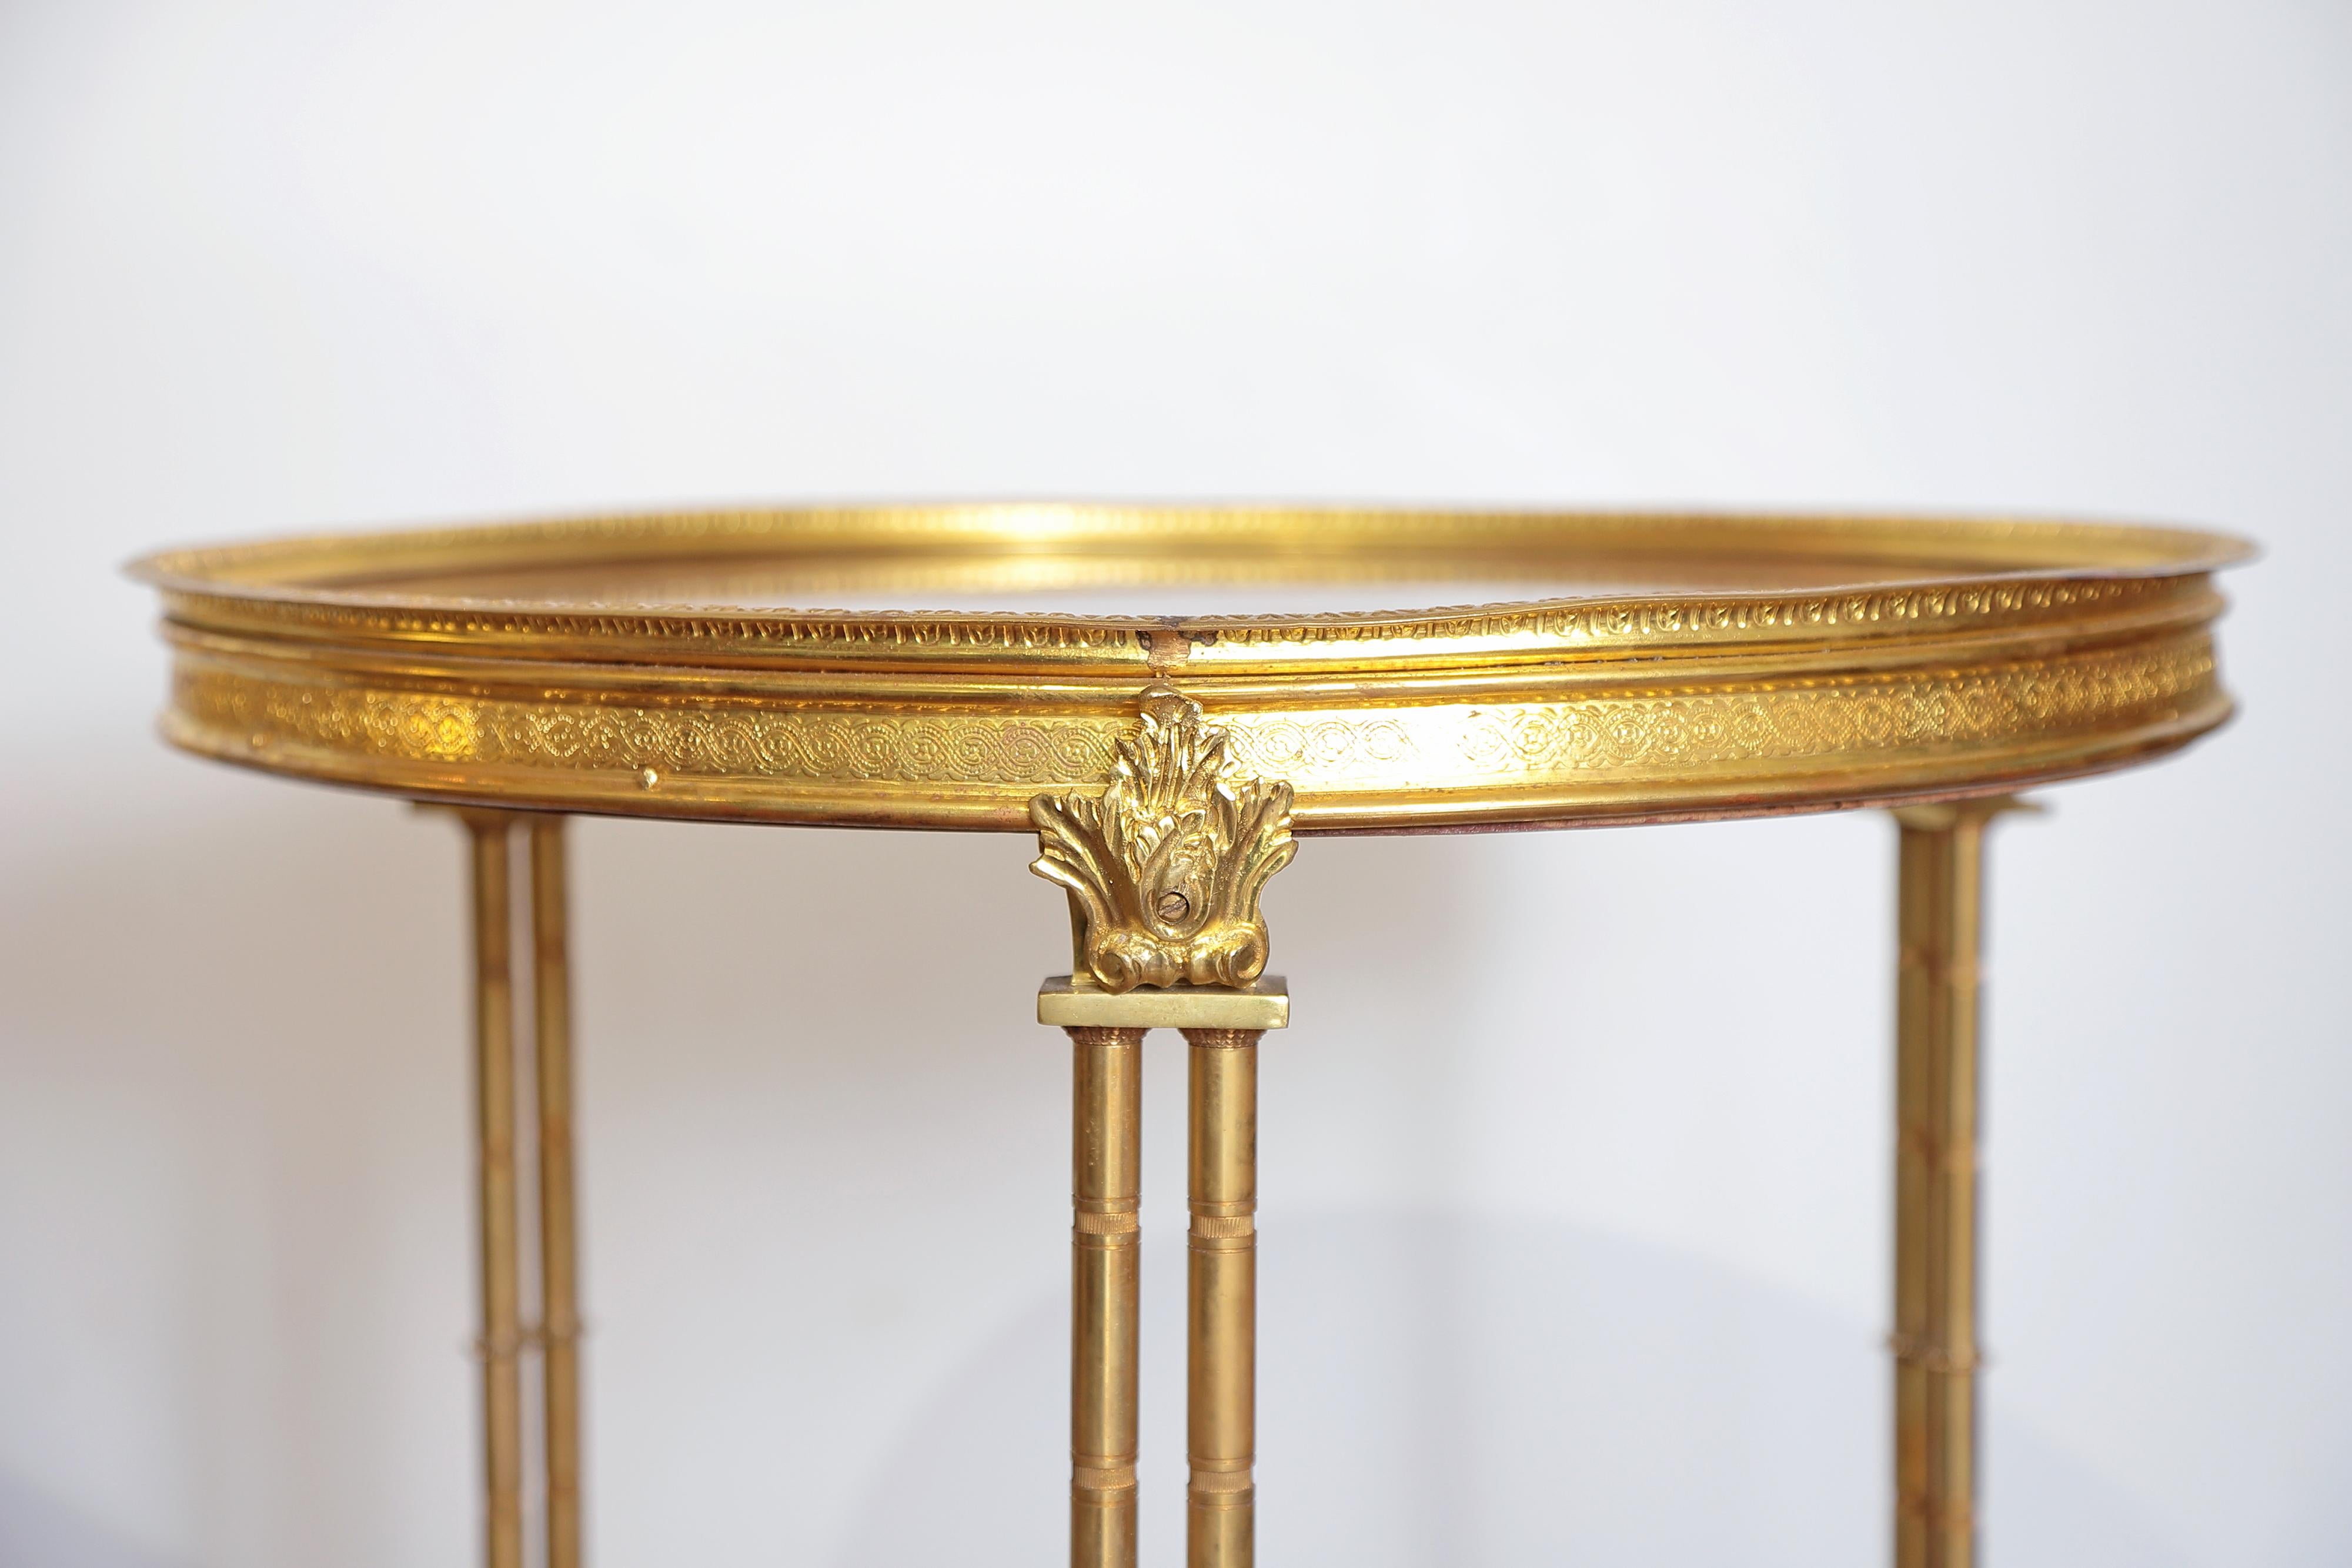 20th Century Pair of French Gilt Bronze Marble-Top Guéridons in the Style of Adam Weisweiler